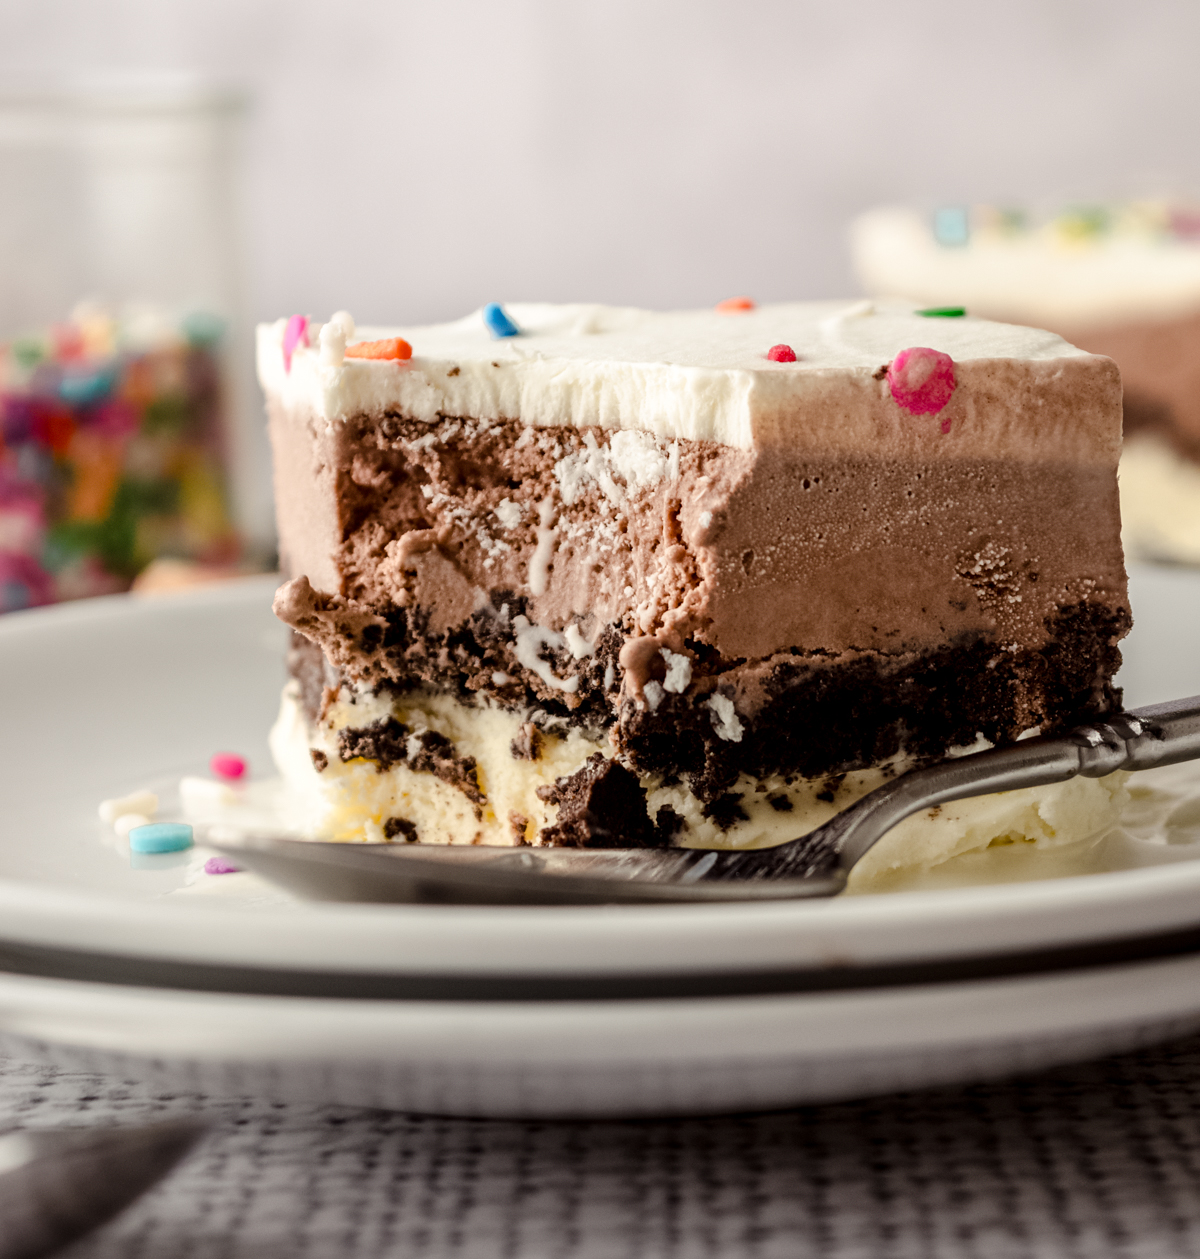 A slice of ice cream sheet cake on a plate with a spoon and a bite taken out of it.